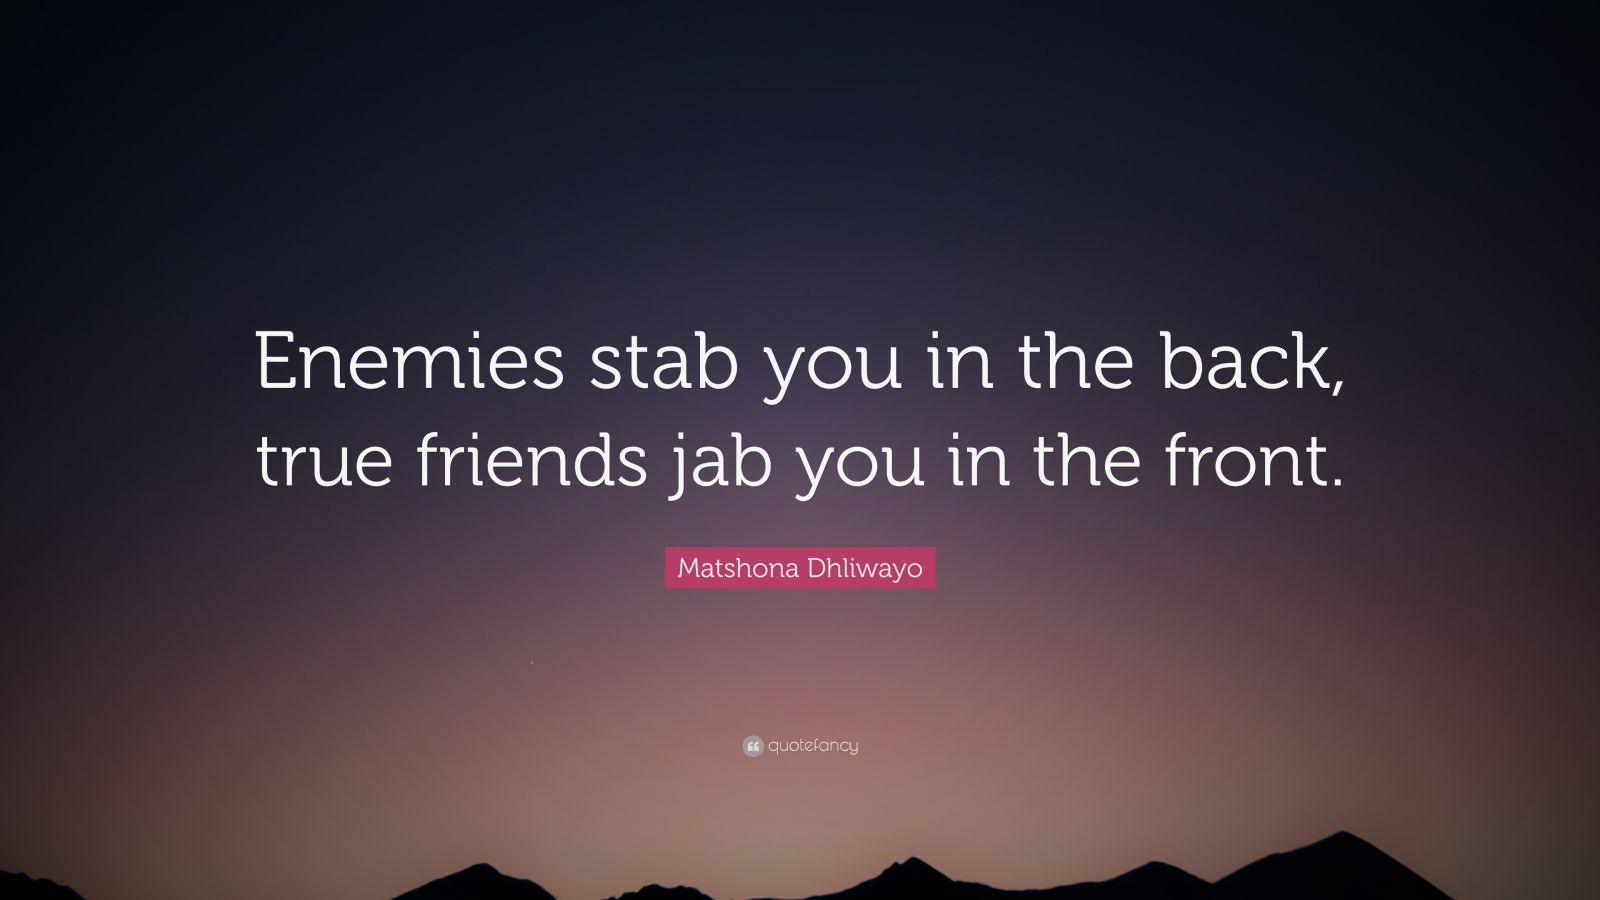 Matshona Dhliwayo Quote: “Enemies stab you in the back, true friends ...